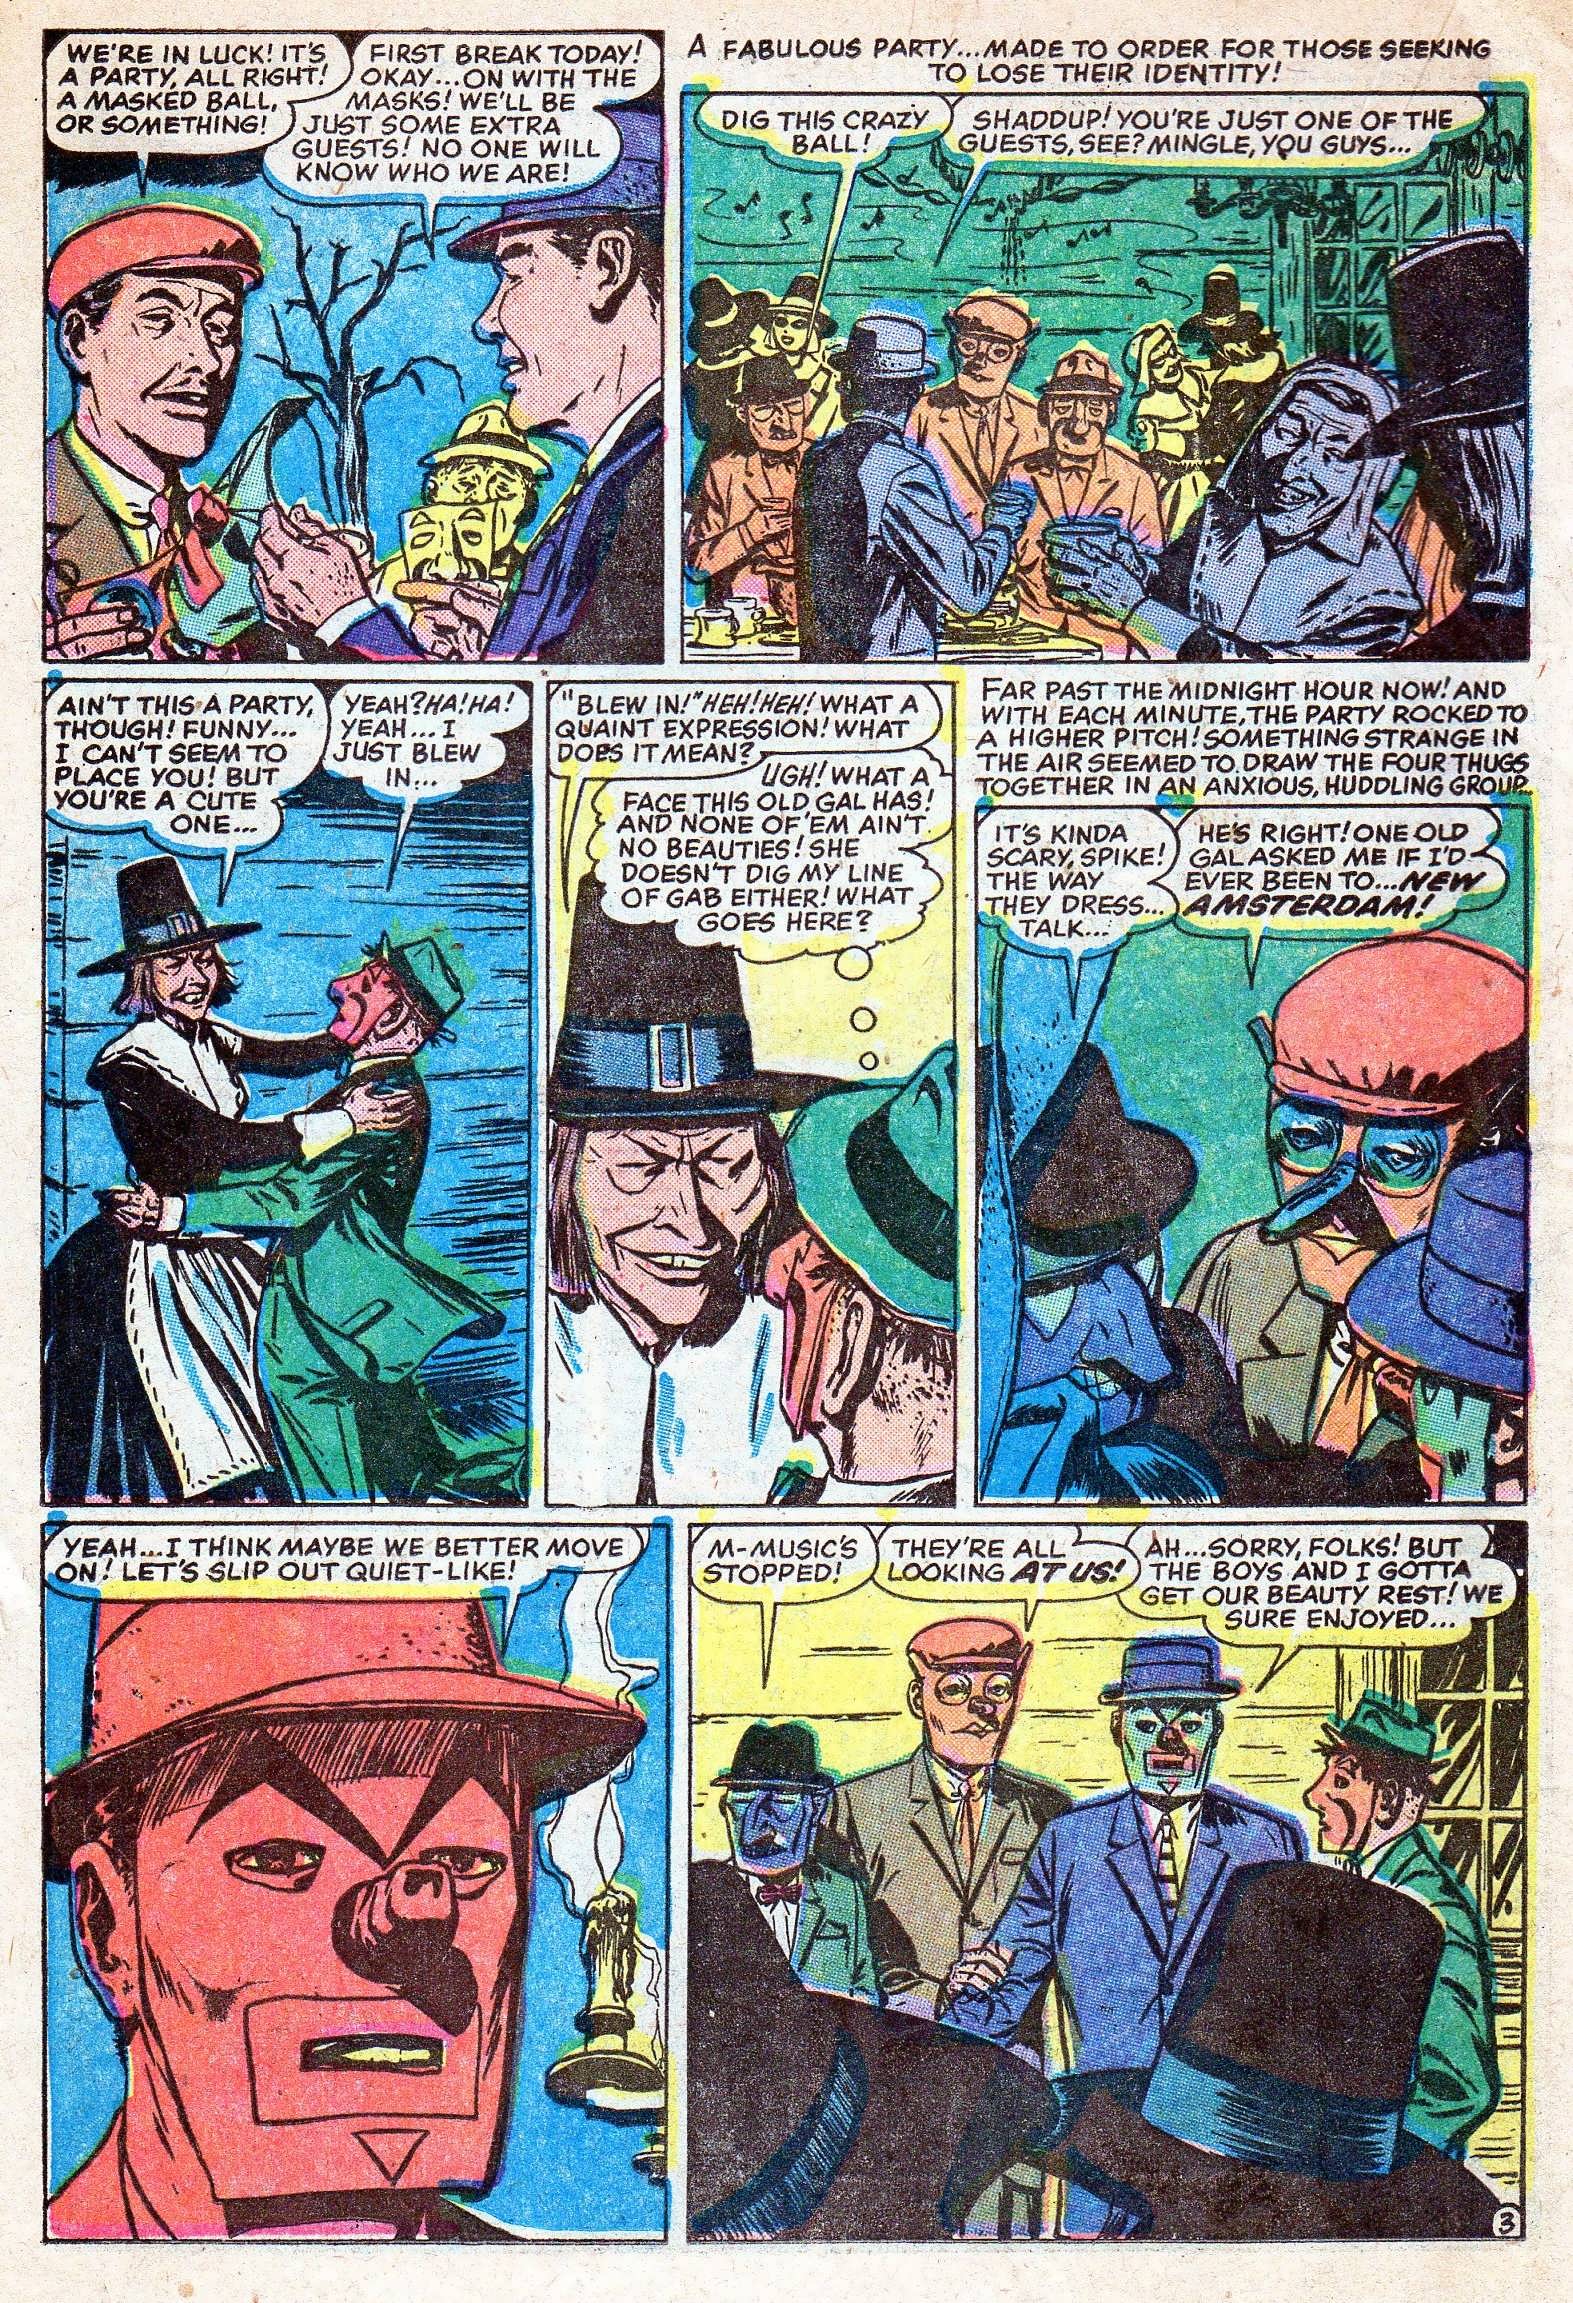 Marvel Tales (1949) 159 Page 19